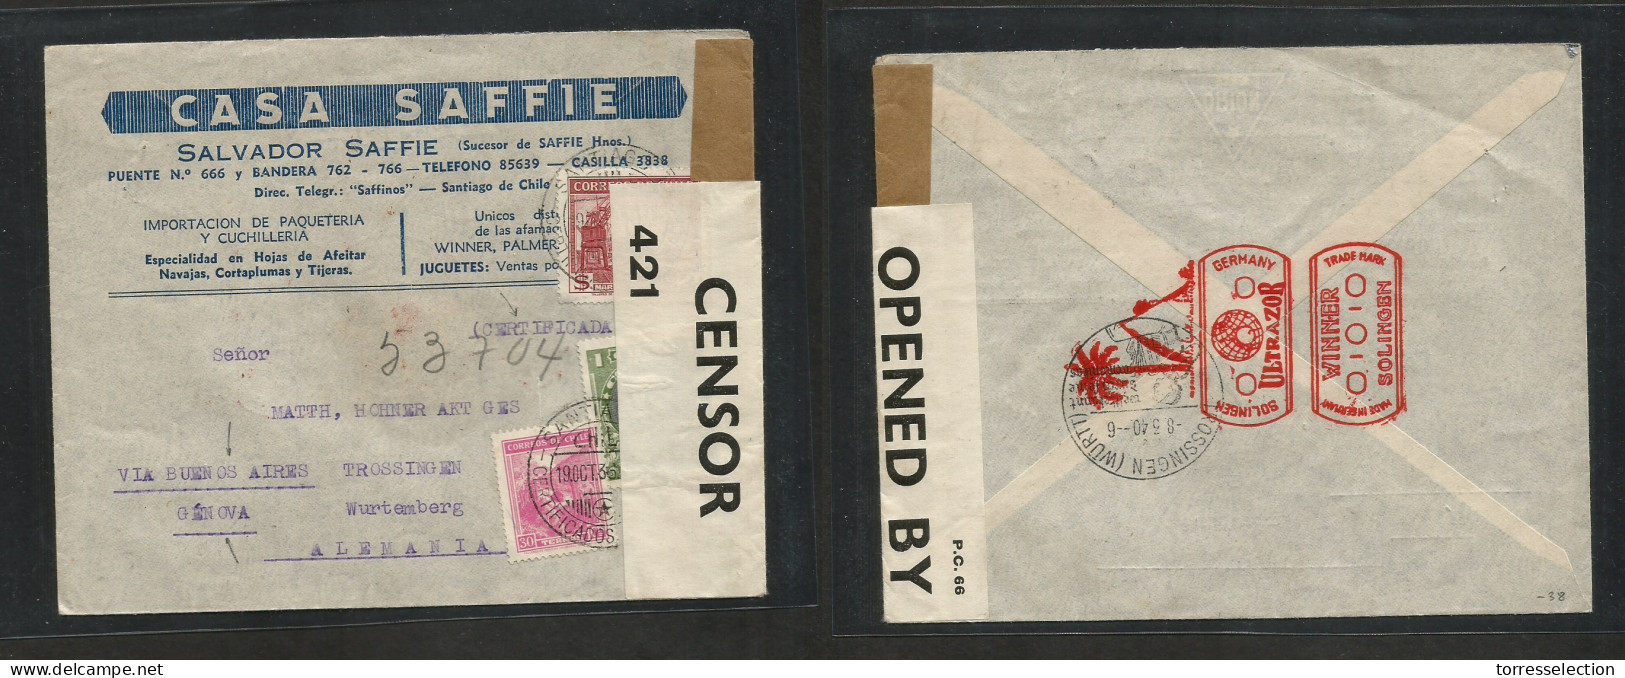 Chile - XX. 1939 (19 Oct) Stgo - Germany, Trossingen (9 March 40) Via Buenos Aires - Genova. WWII Censored Illustrated M - Chile